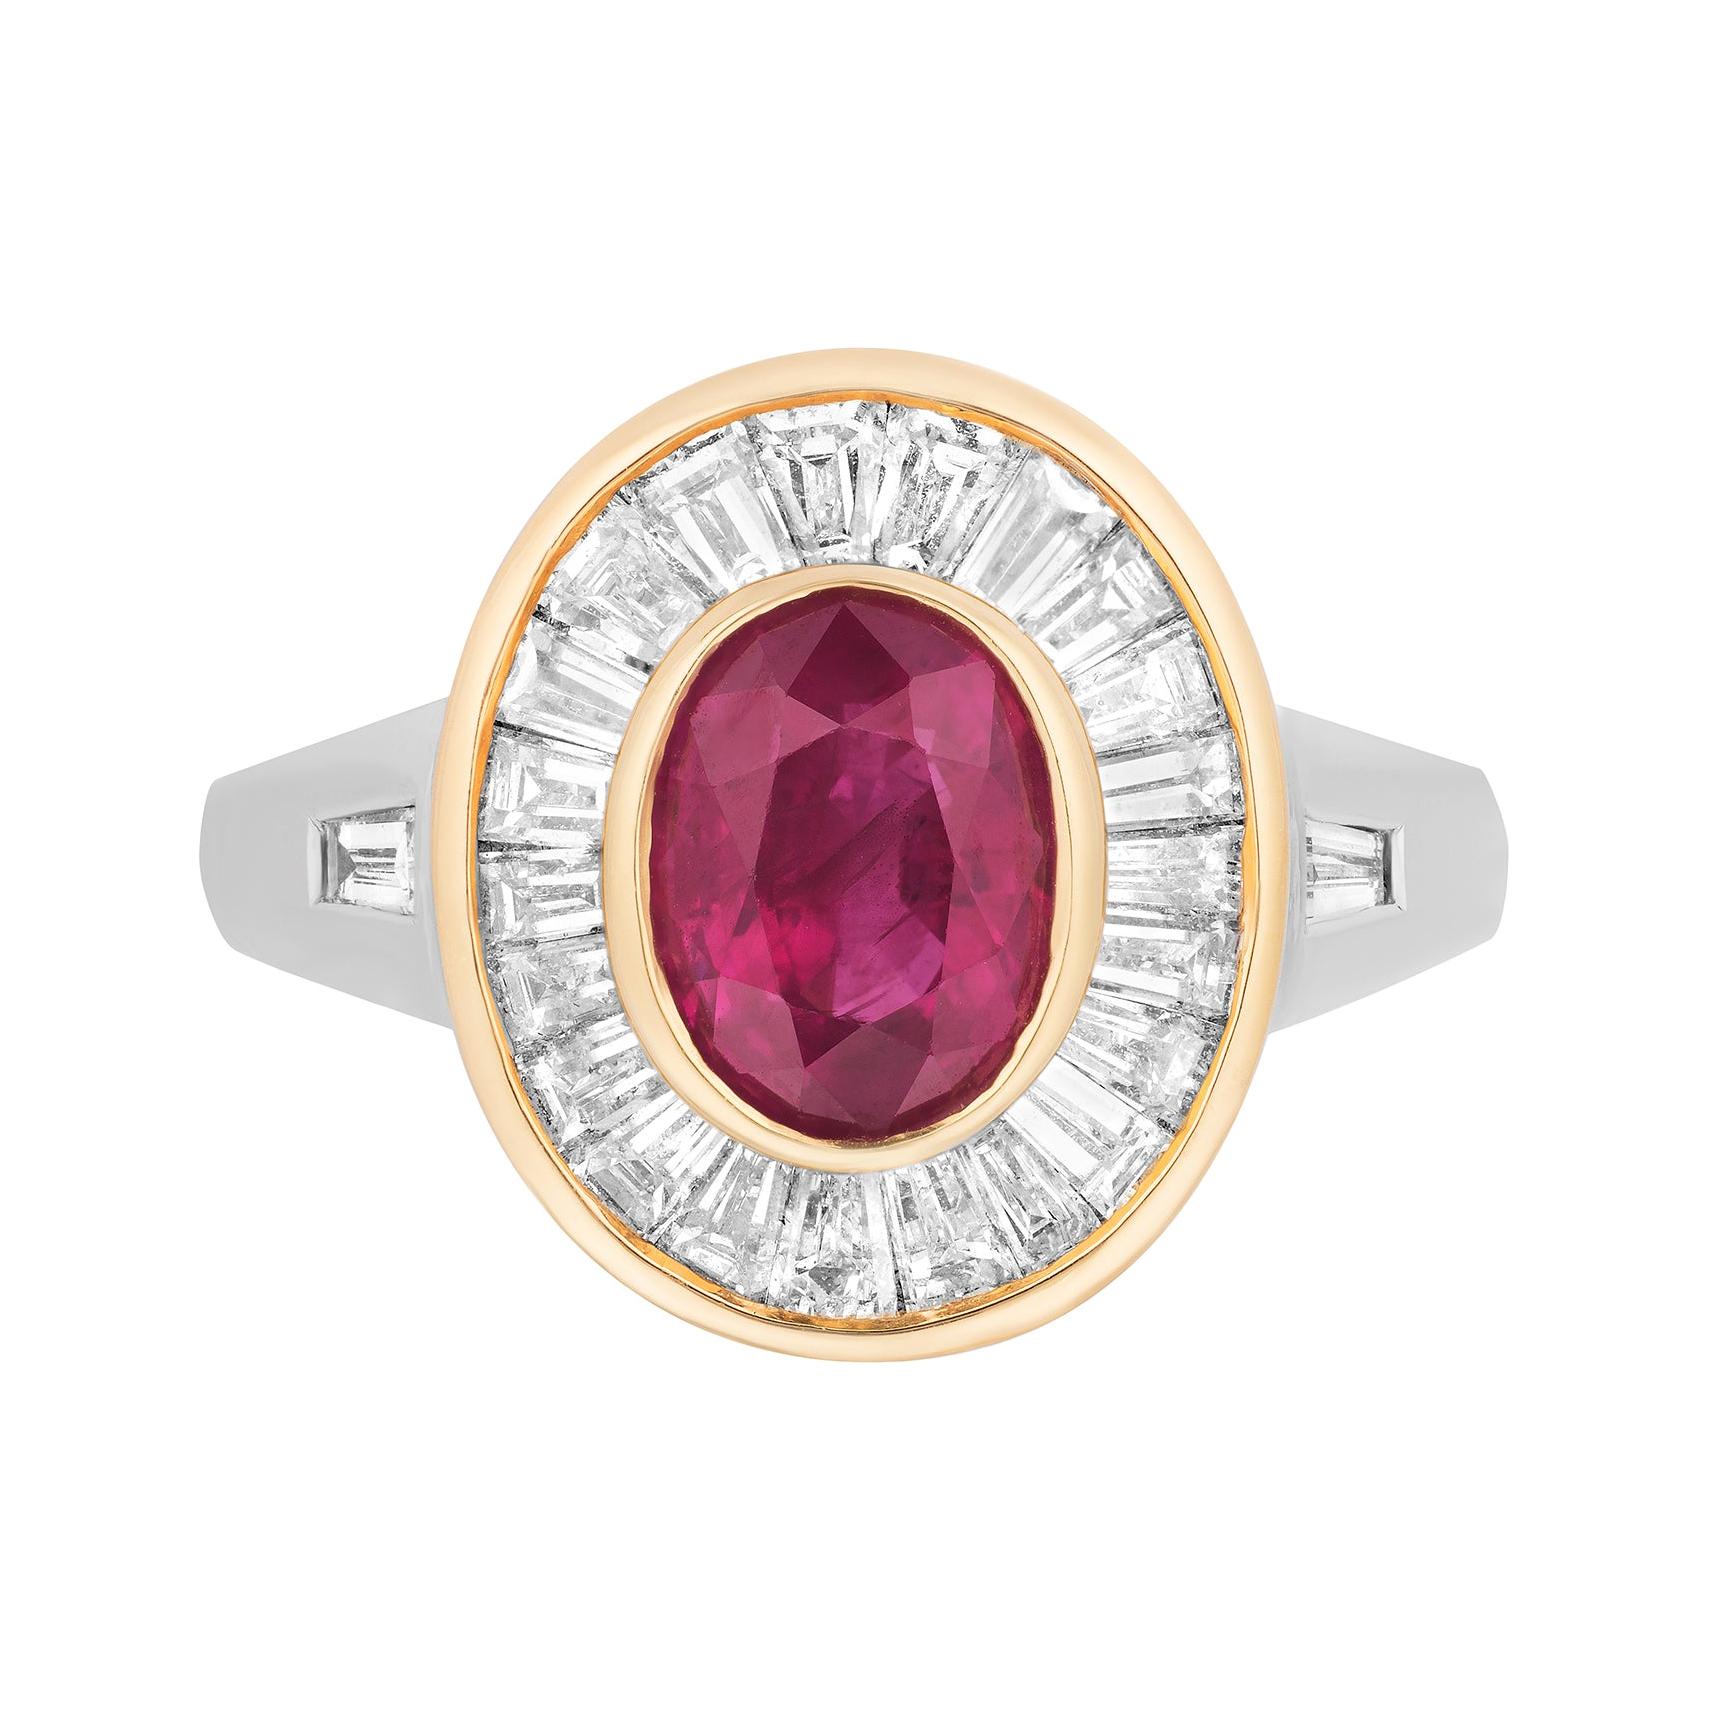 Burma Ruby Diamond Ring 18k White & Rose Gold Andreoli Certified For Sale